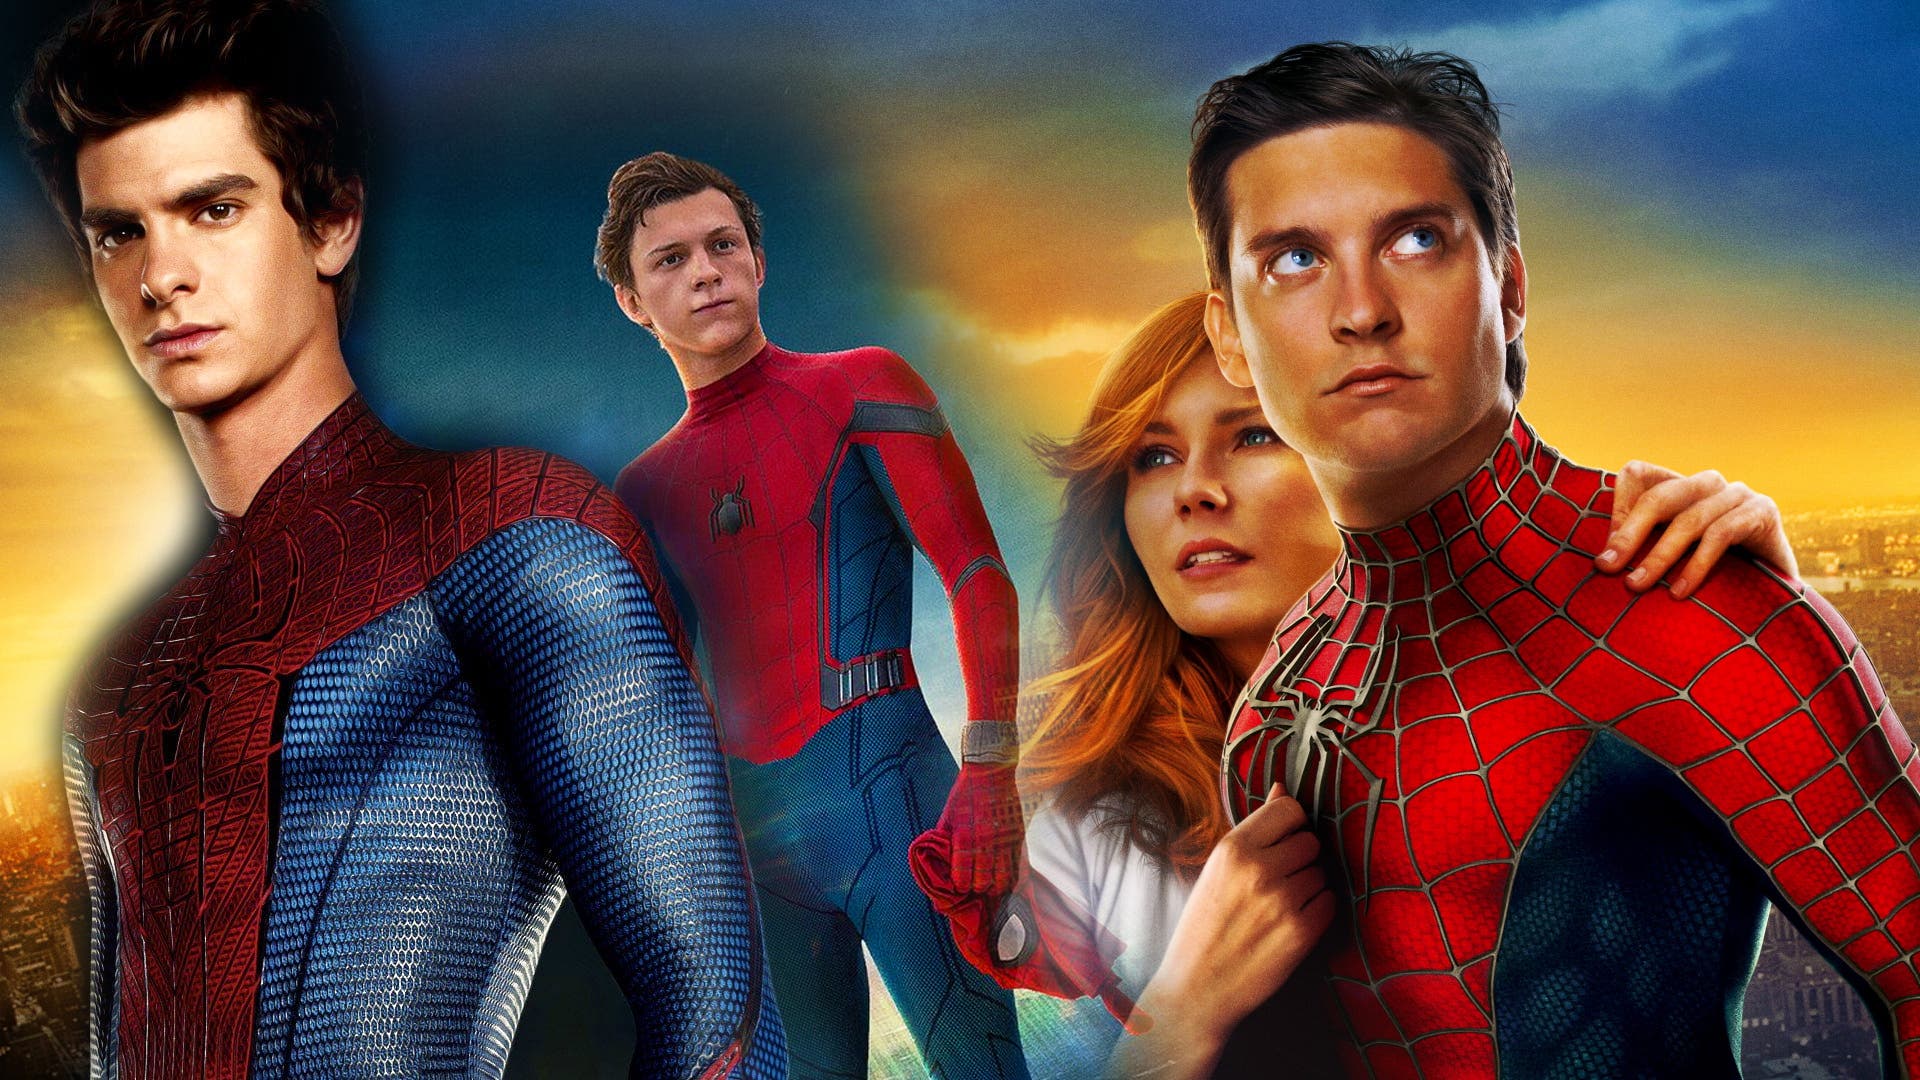 Andrew Garfield, Kirsten Dunst And Others Confirmed For Spider Man 3